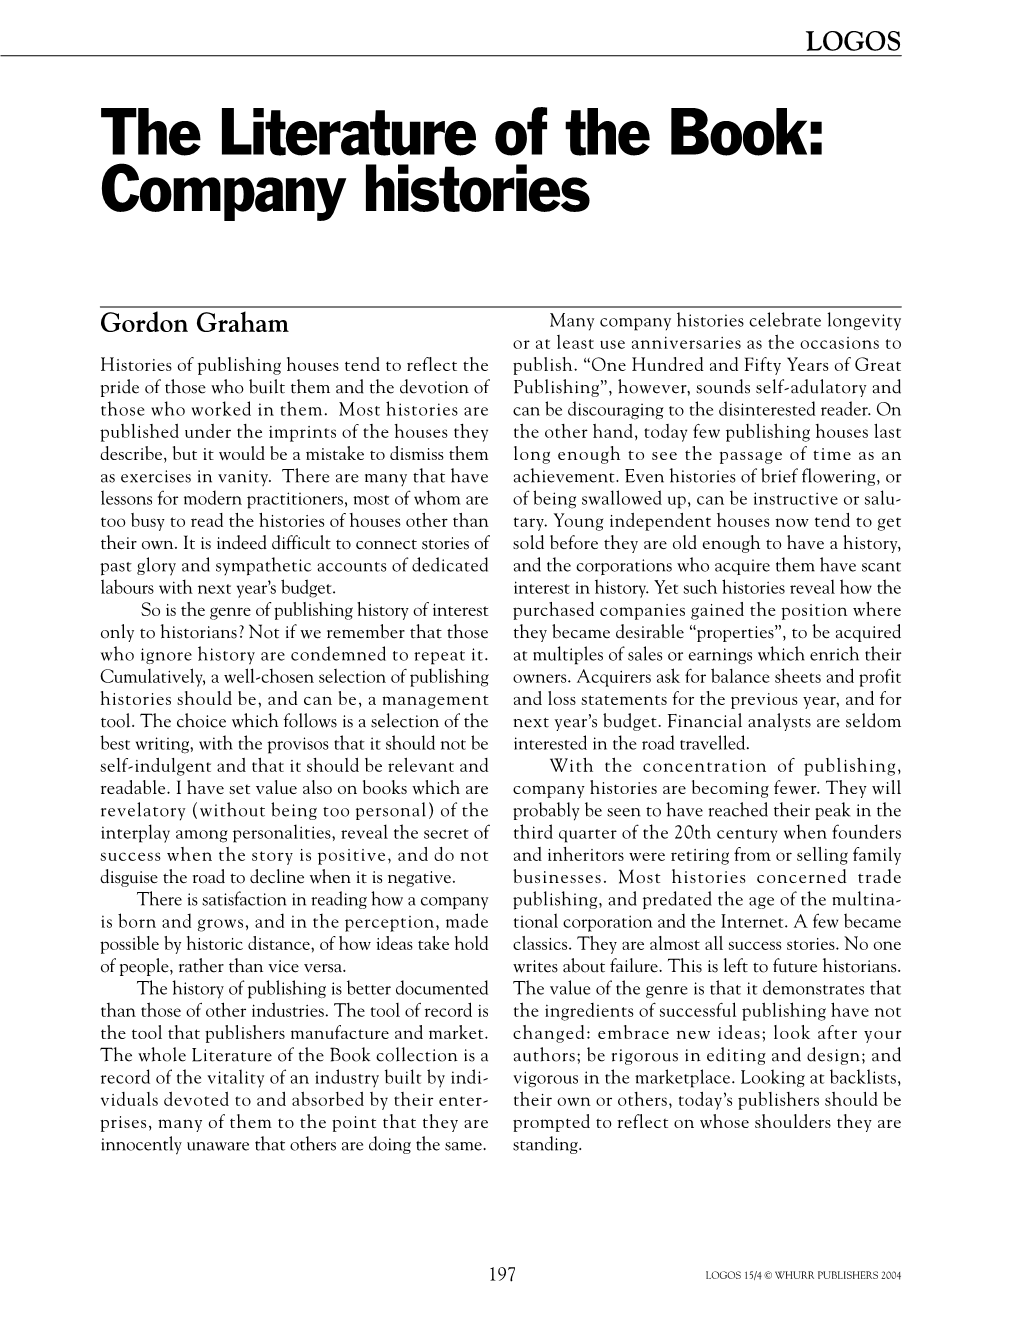 The Literature of the Book: Company Histories